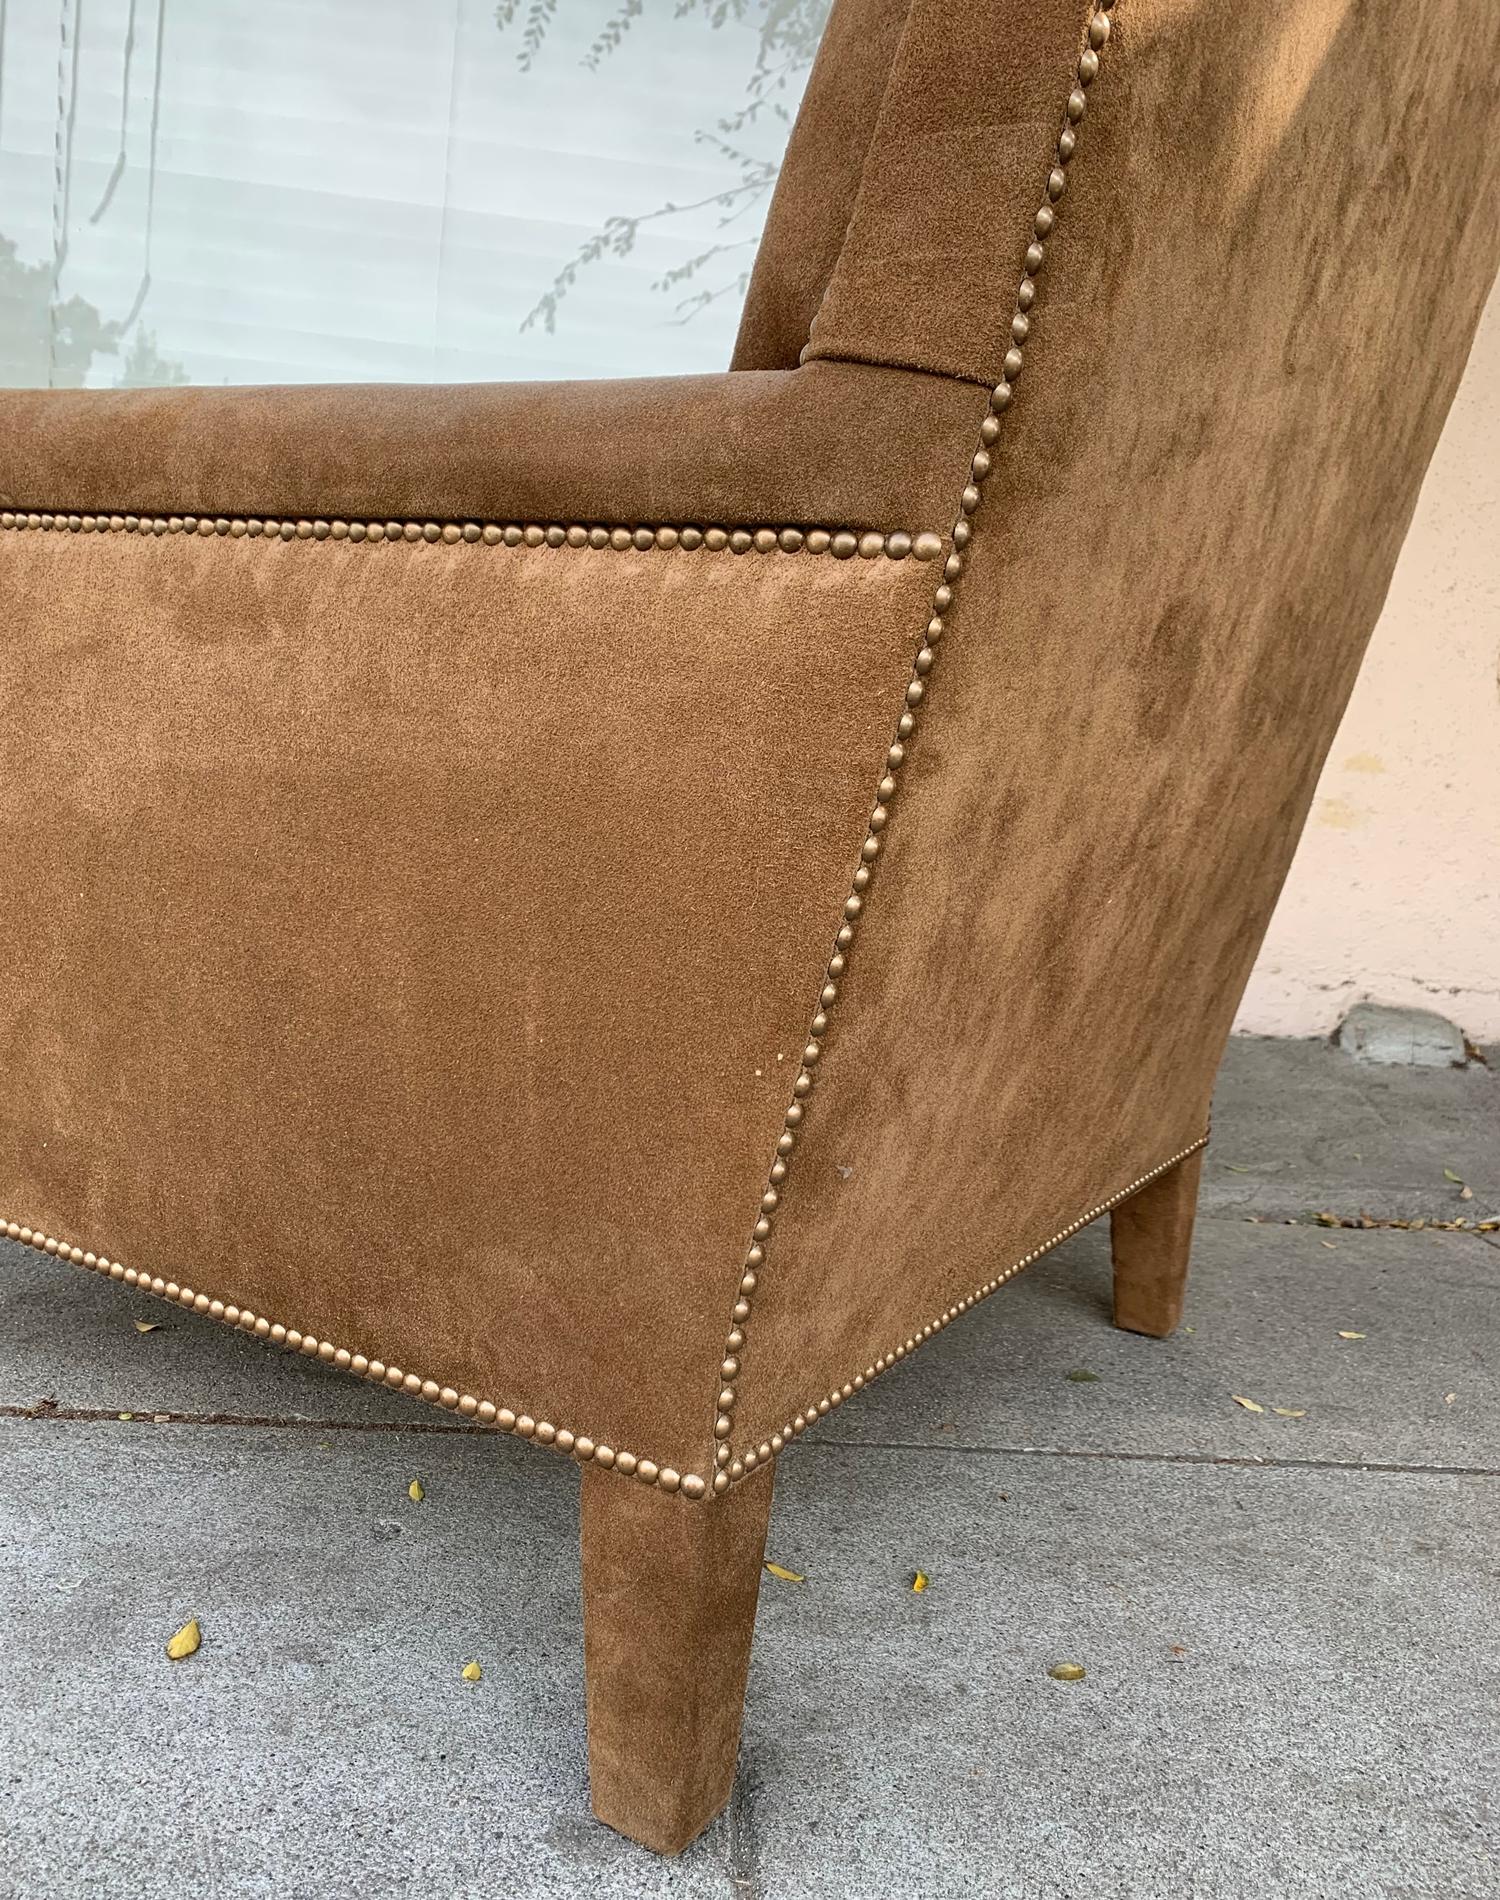 Pair of large armchairs upholstered in brown suede with nailhead trimming.
The chairs are in excellent condition, vintage but newly upholstered.
Measurements:
37” high x 32” wide x 39” deep x 20” seat height x 25” seat depth x 25” seat width x